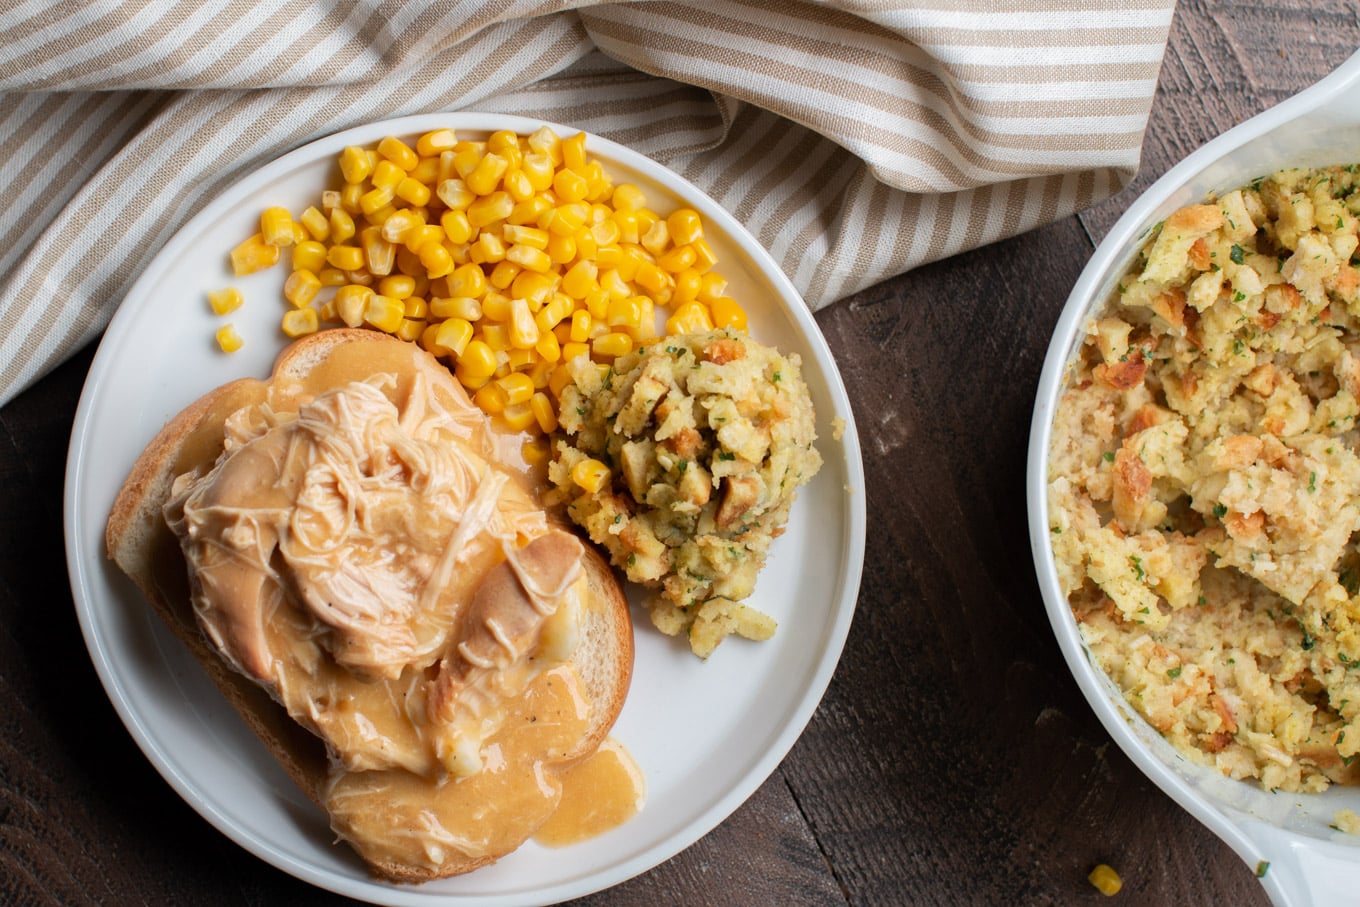 Plate of bread, mashed potatoes and chicken and gravy on top. Corn and stuffing on the side.